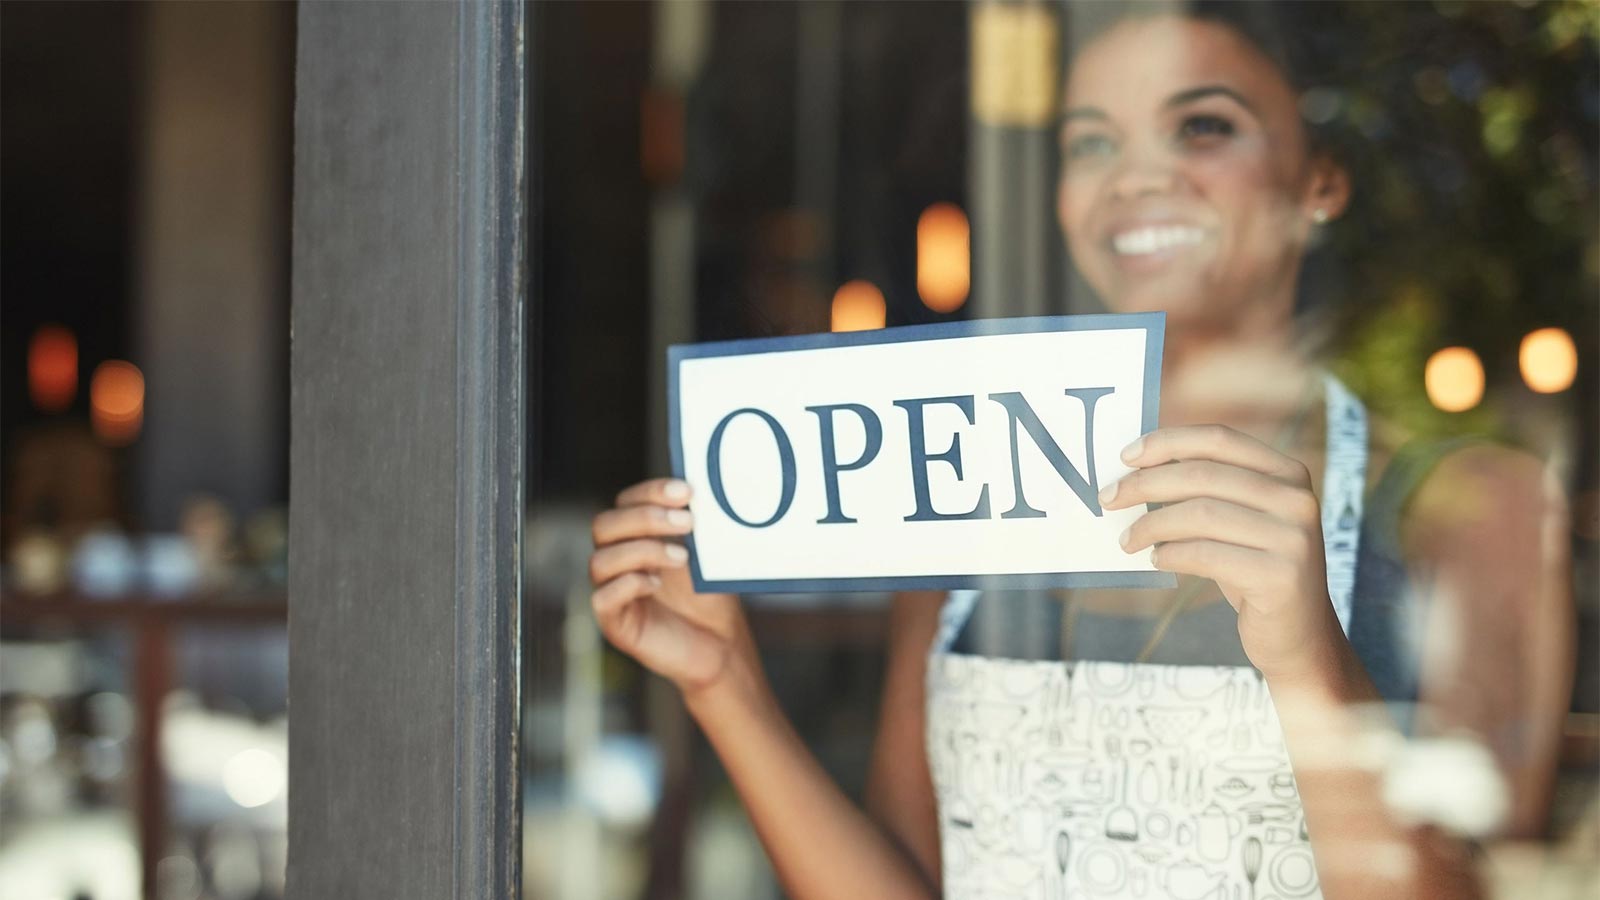 The importance of supporting local businesses